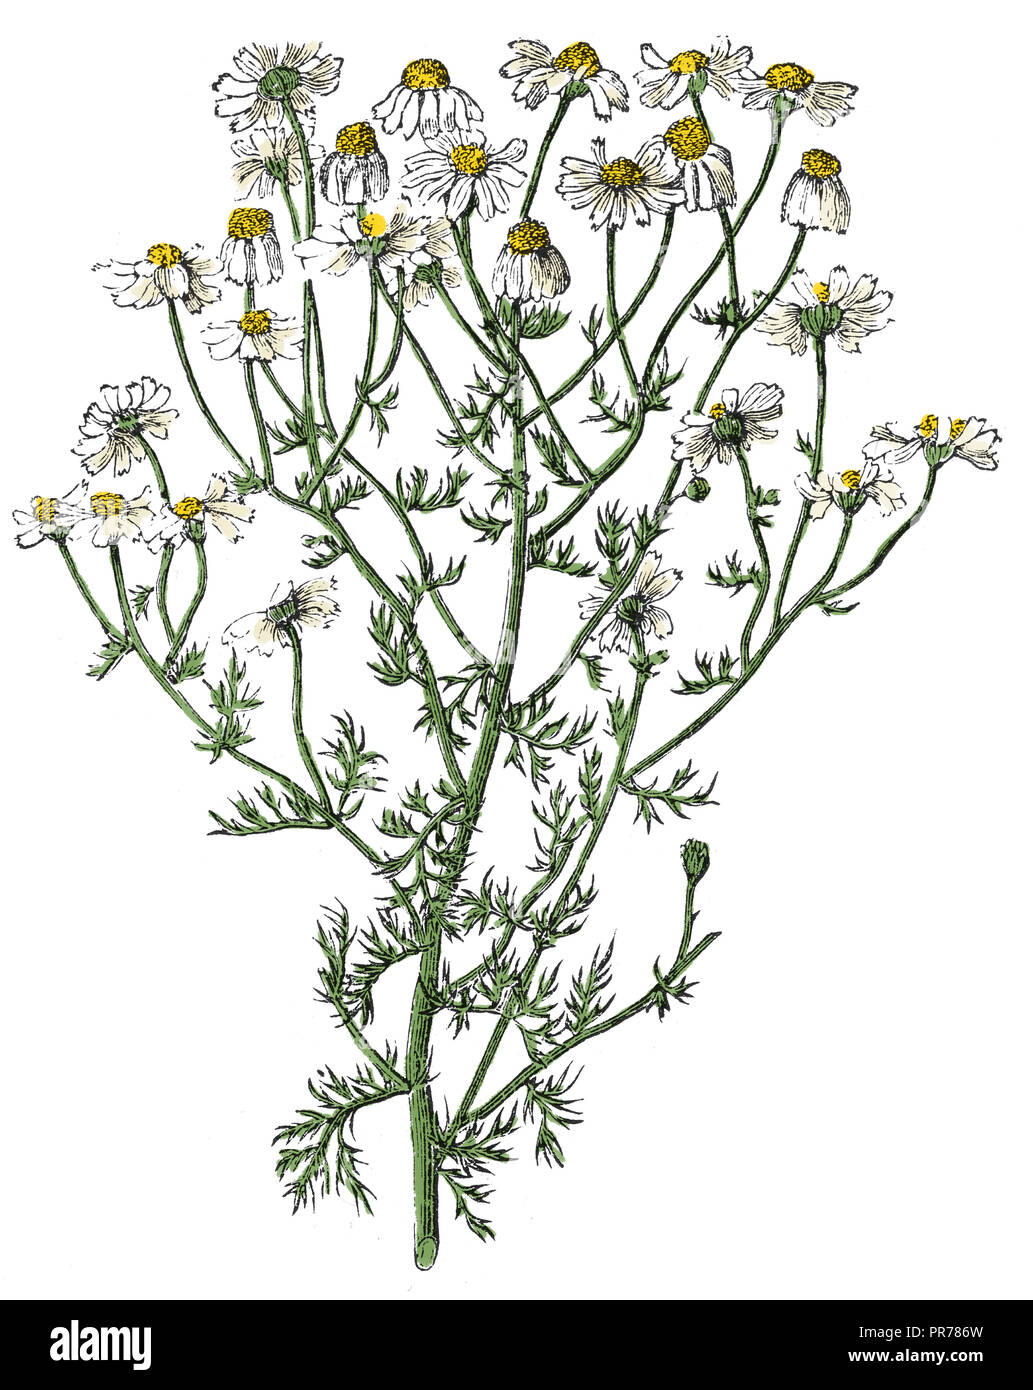 19th century illustration of Matricaria chamomilla (synonym: Matricaria recutita), commonly known as chamomile. Published in Systematischer Bilder-Atl Stock Photo